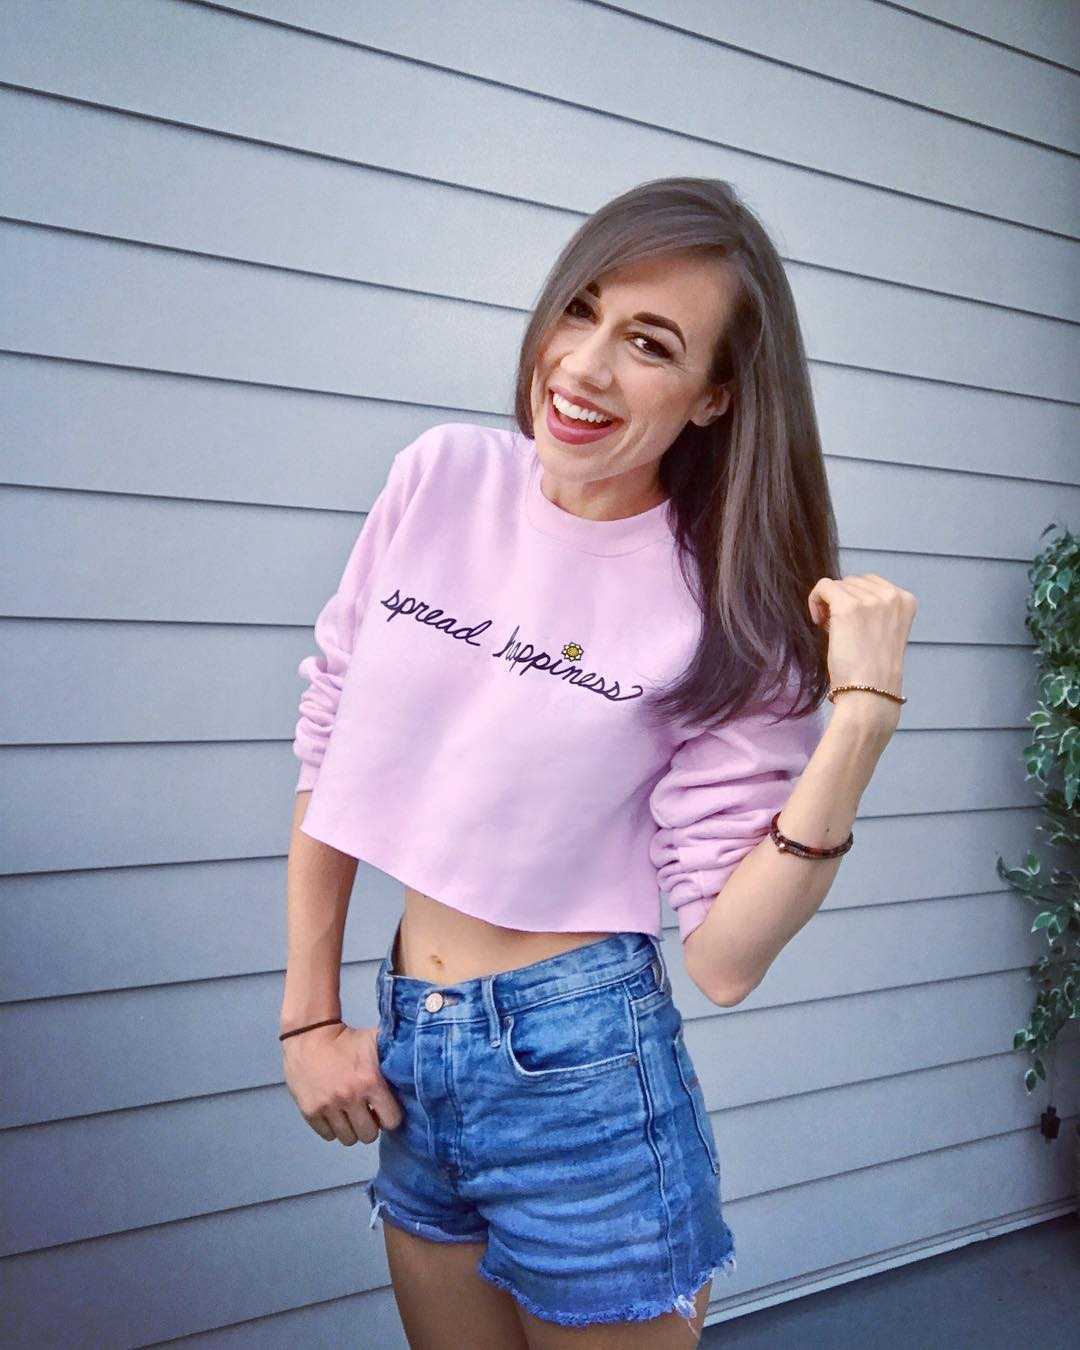 51 Hottest Colleen Ballinger Big Butt Pictures That Will Make You Begin To Look All Starry Eyed At Her 294